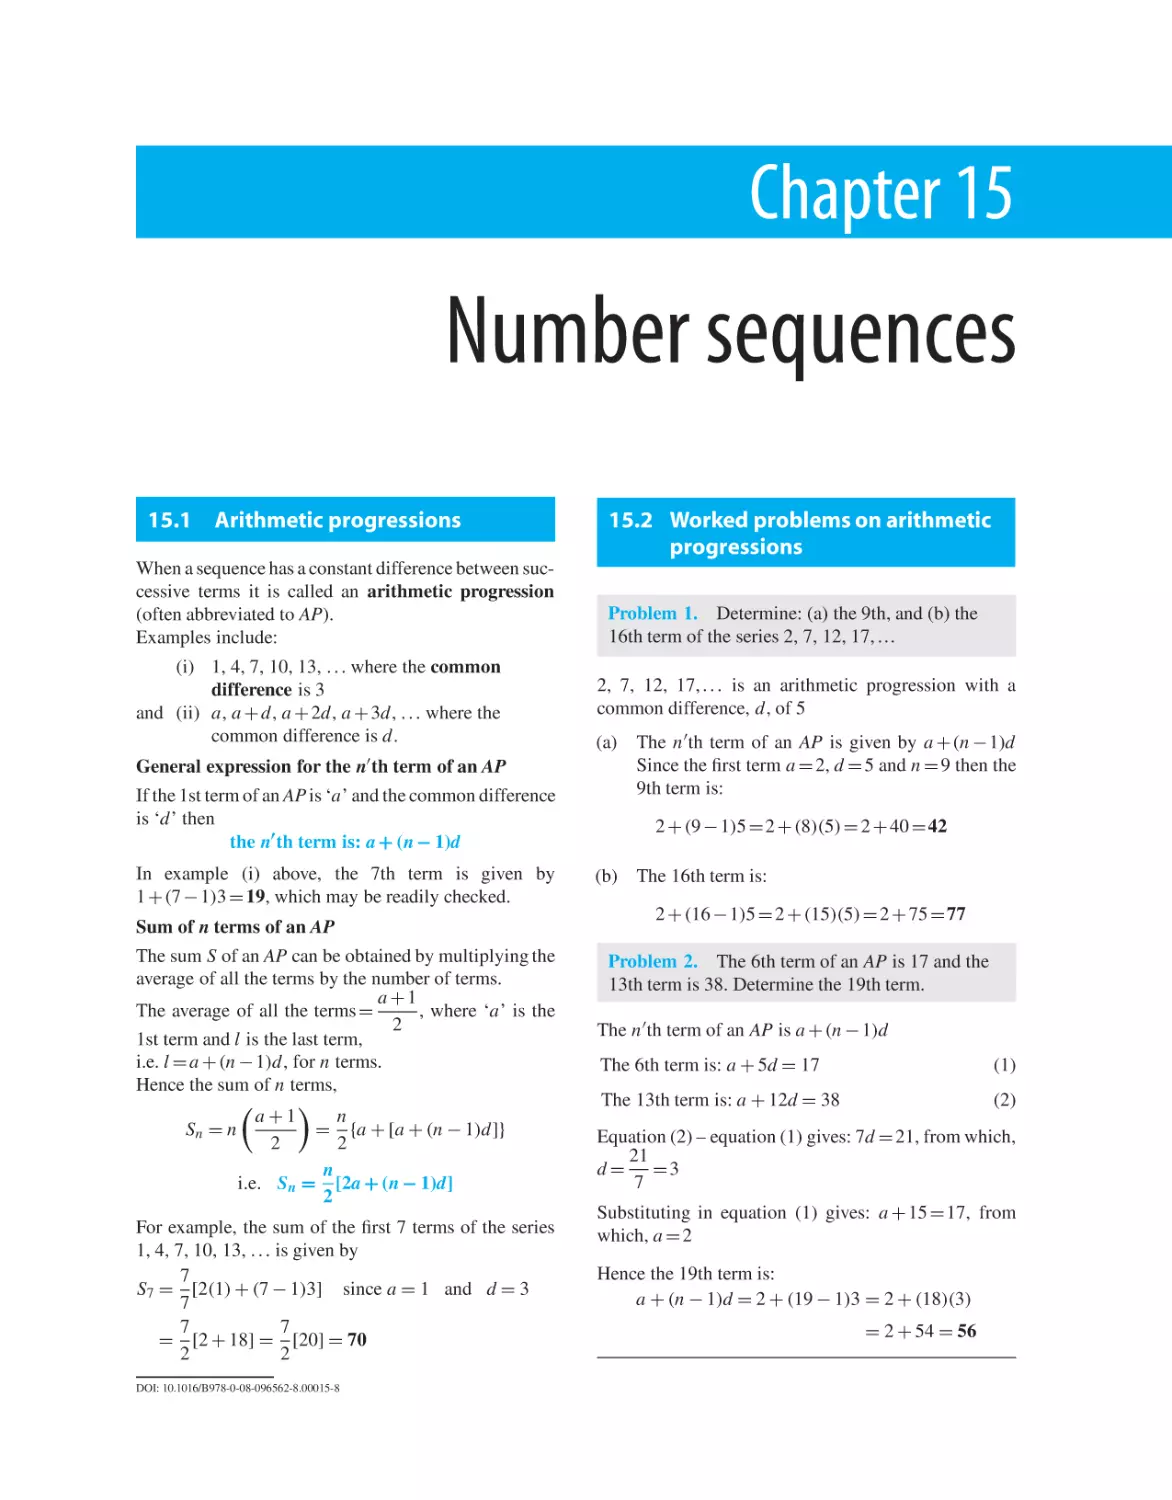 Chapter 15. Number sequences
15.1 Arithmetic progressions
15.2 Worked problems on arithmetic progressions